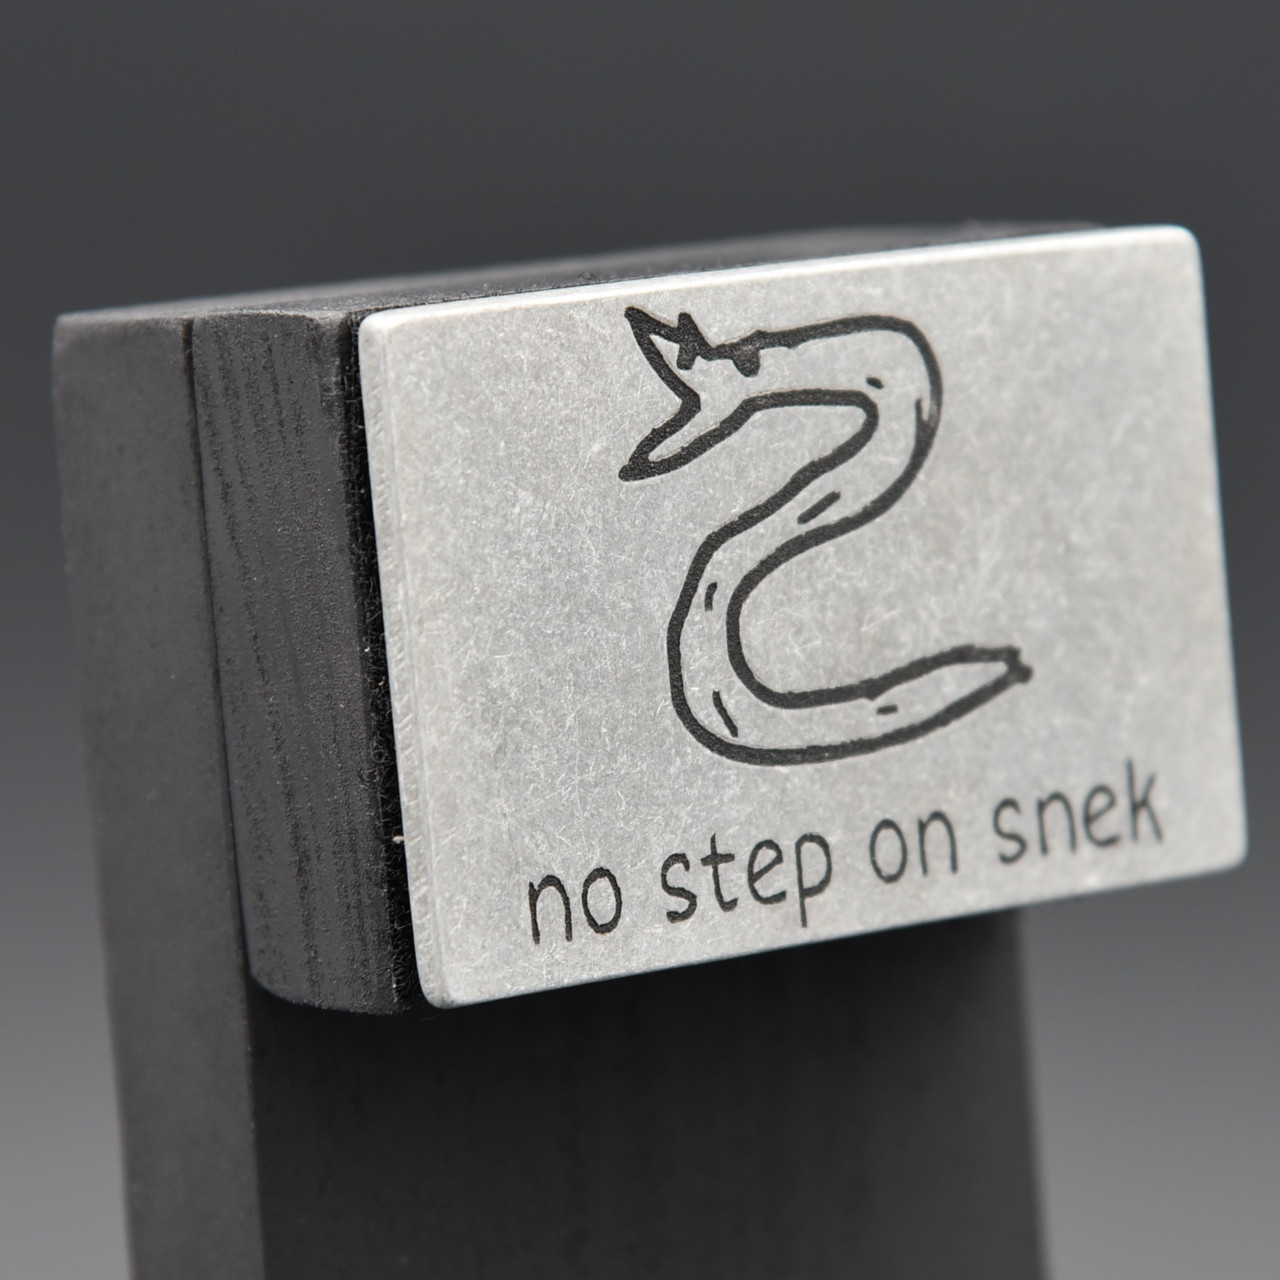 Funny No Step on Snek Laser-cut-ir Patch/dtom Patch/nwu Patch/tactical Patch//morale  Patch/us Flag Patch/tactical Military Flag/gadsden Flag -  Sweden